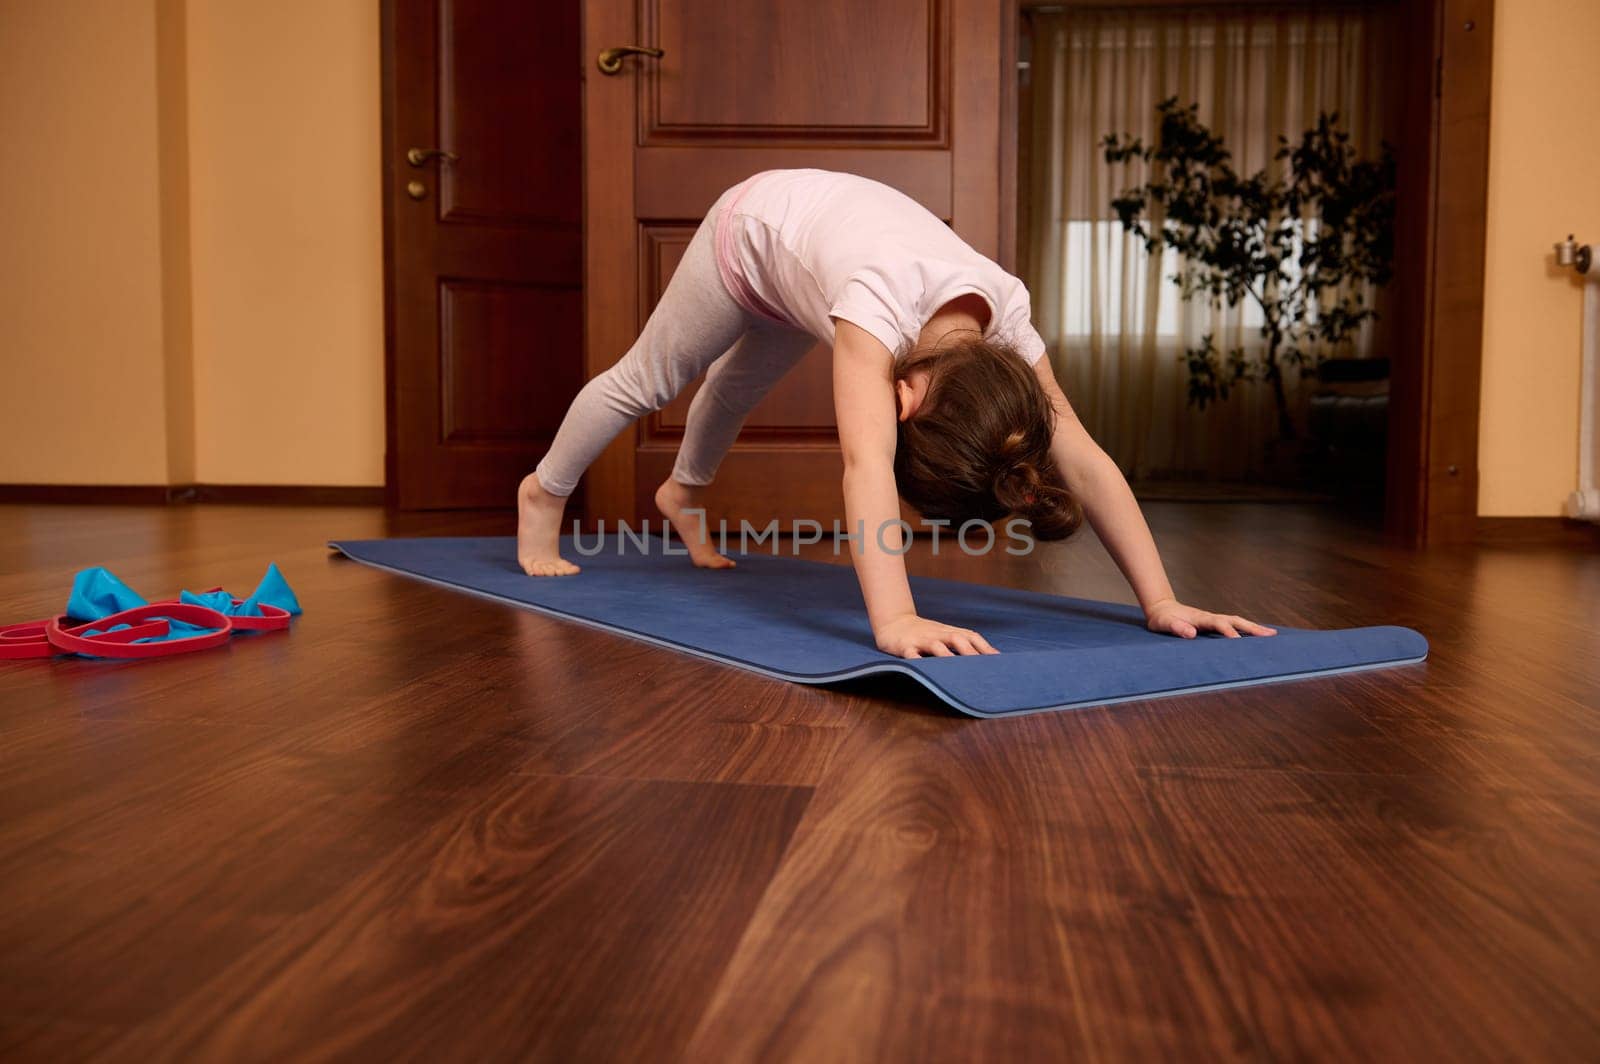 Caucasian 5-6 years old cute little girl, adorable sporty kid stretching her body in downward facing dog pose, practicing yoga in cozy home interior. Yoga practice. Sport. Health and active lidestyle